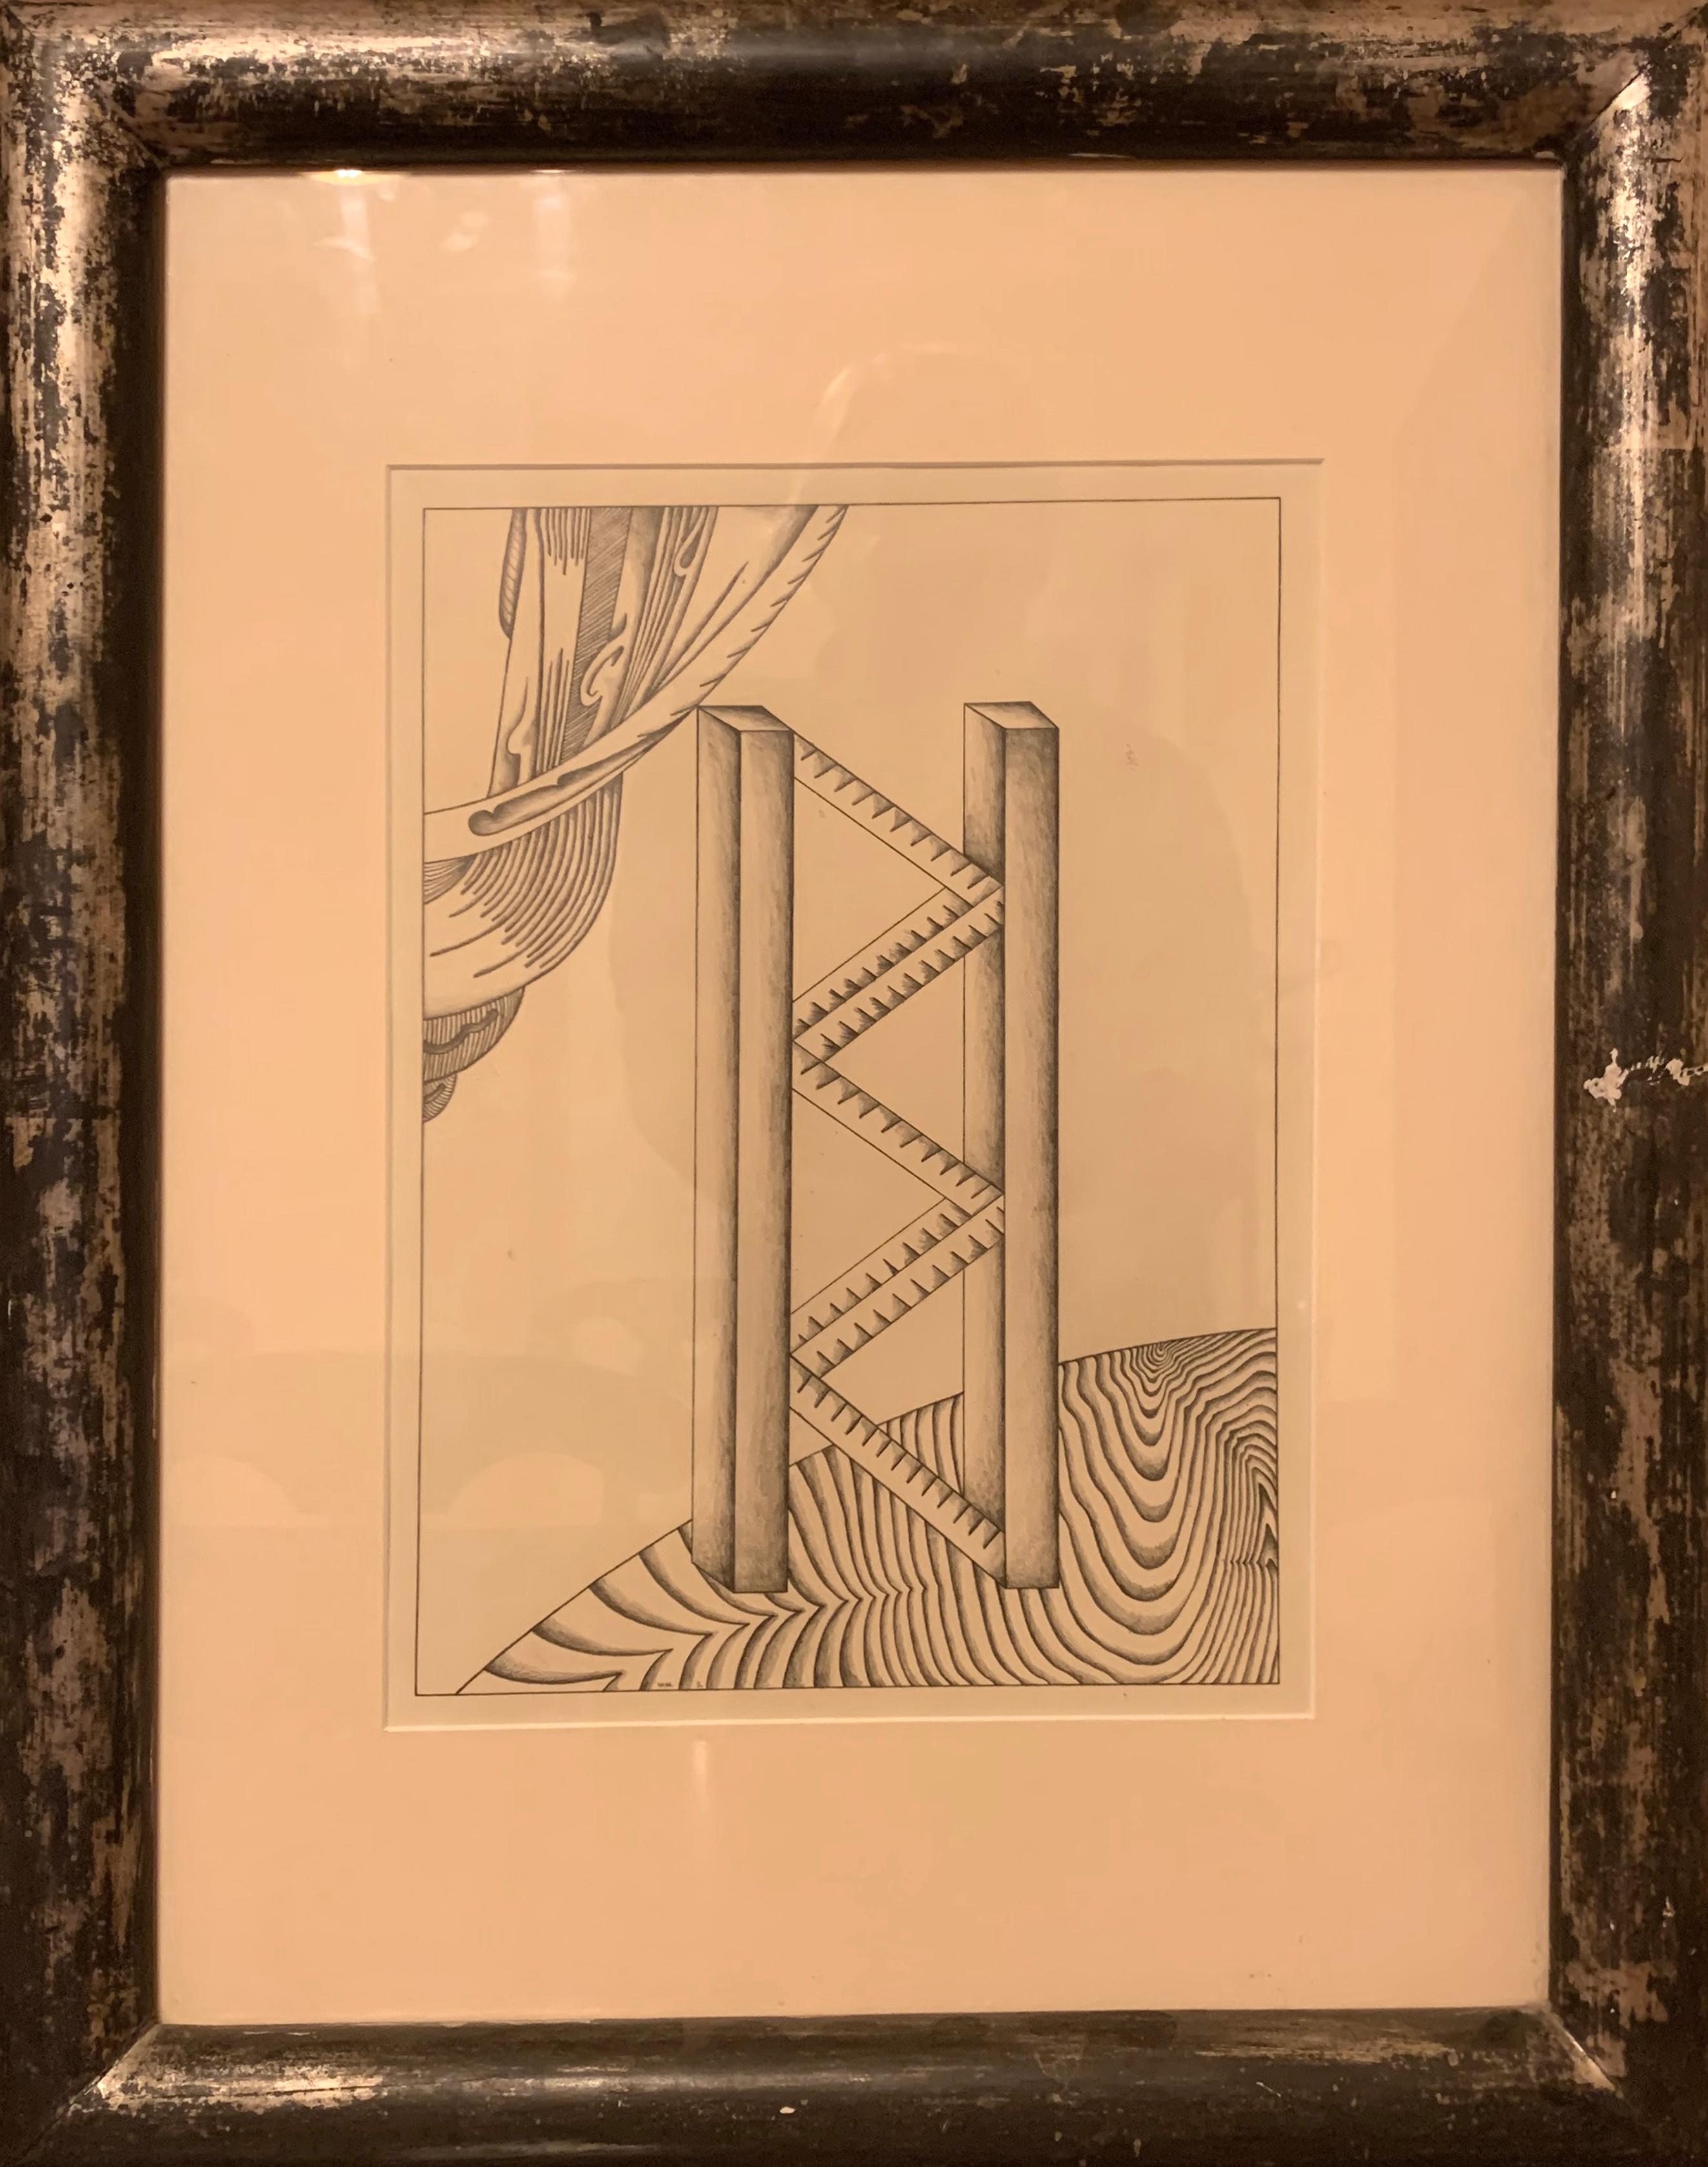 This abstract composition by William Schwedler includes several geometric forms and shapes that are placed alongside straight, angled lines.

Untitled 1
Artist:  William Schwedler, American (1942 - 1982)
Date: circa 1970
Graphite on paper
Size: 26 x